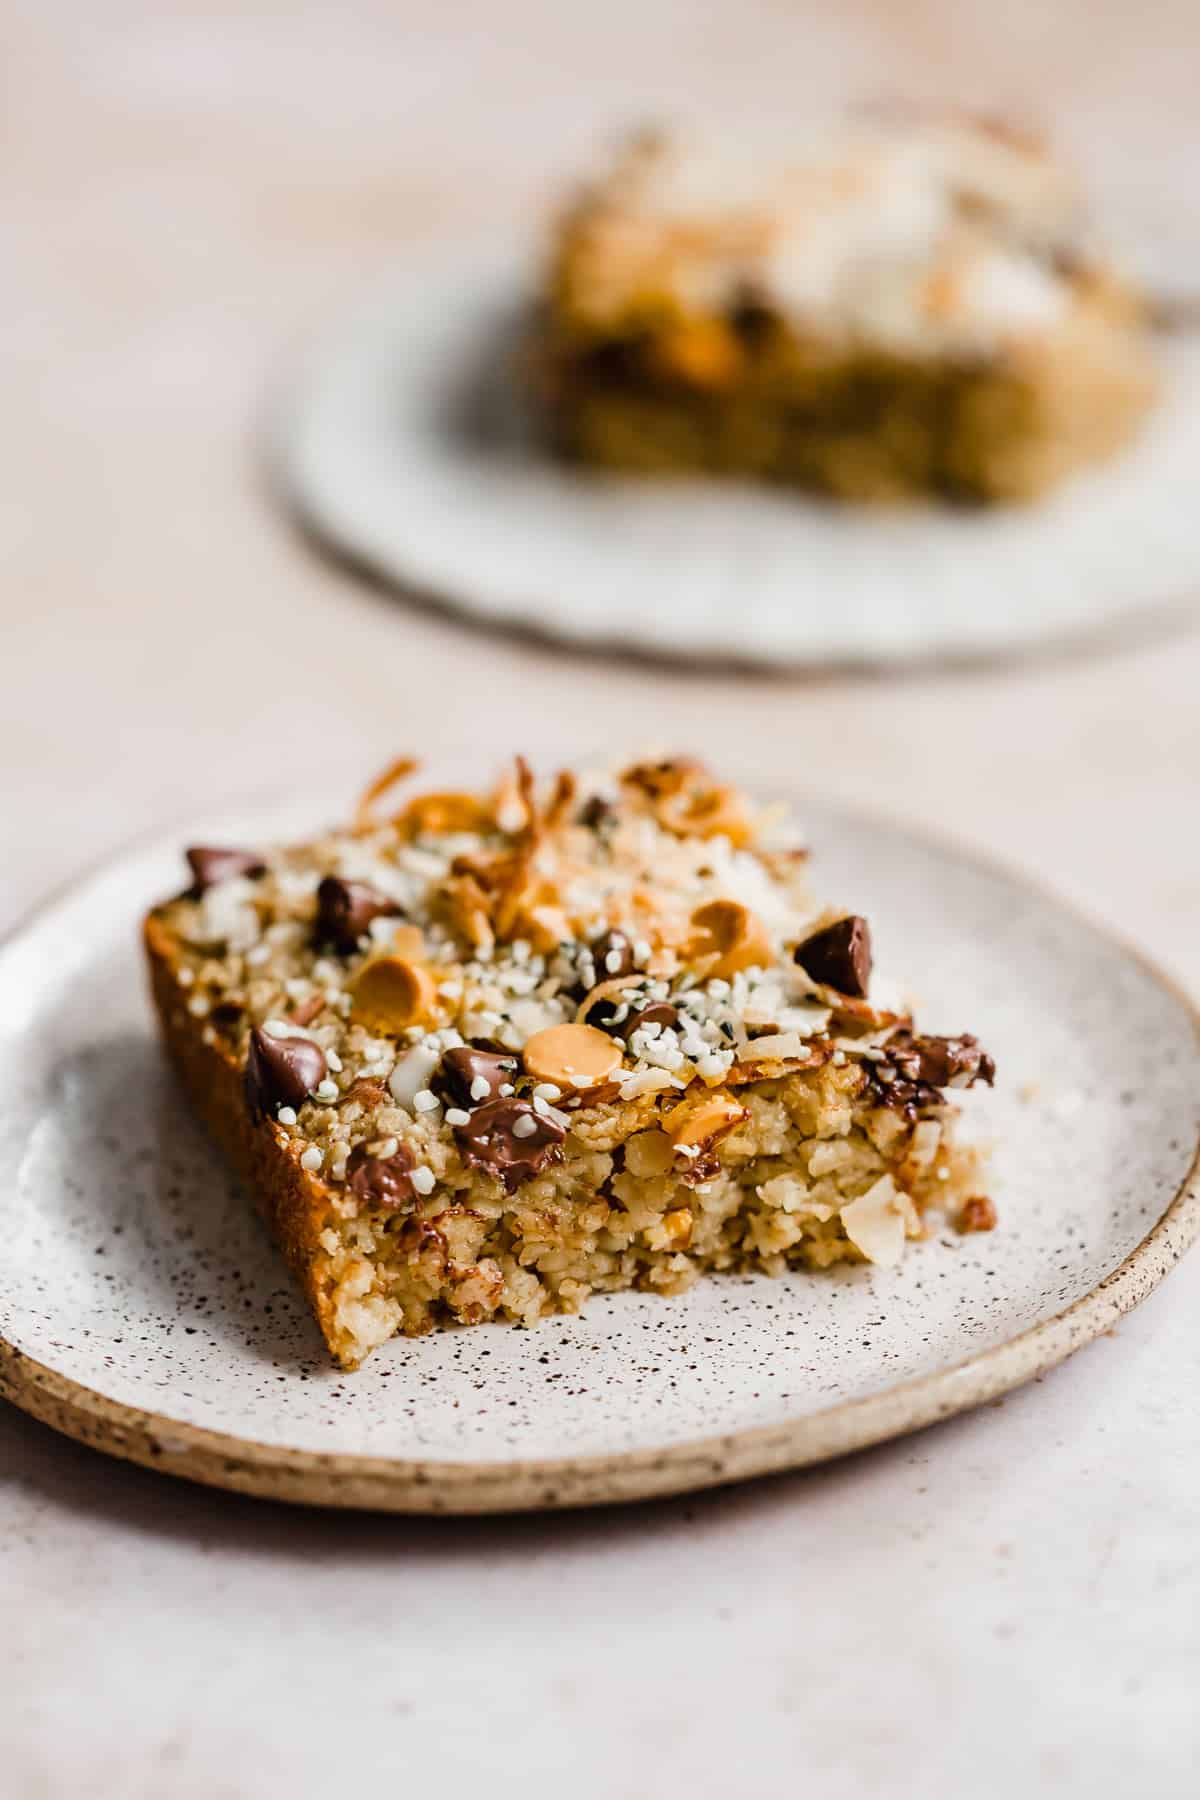 A square slice of Breakfast Baked Oatmeal Cake on a plate.